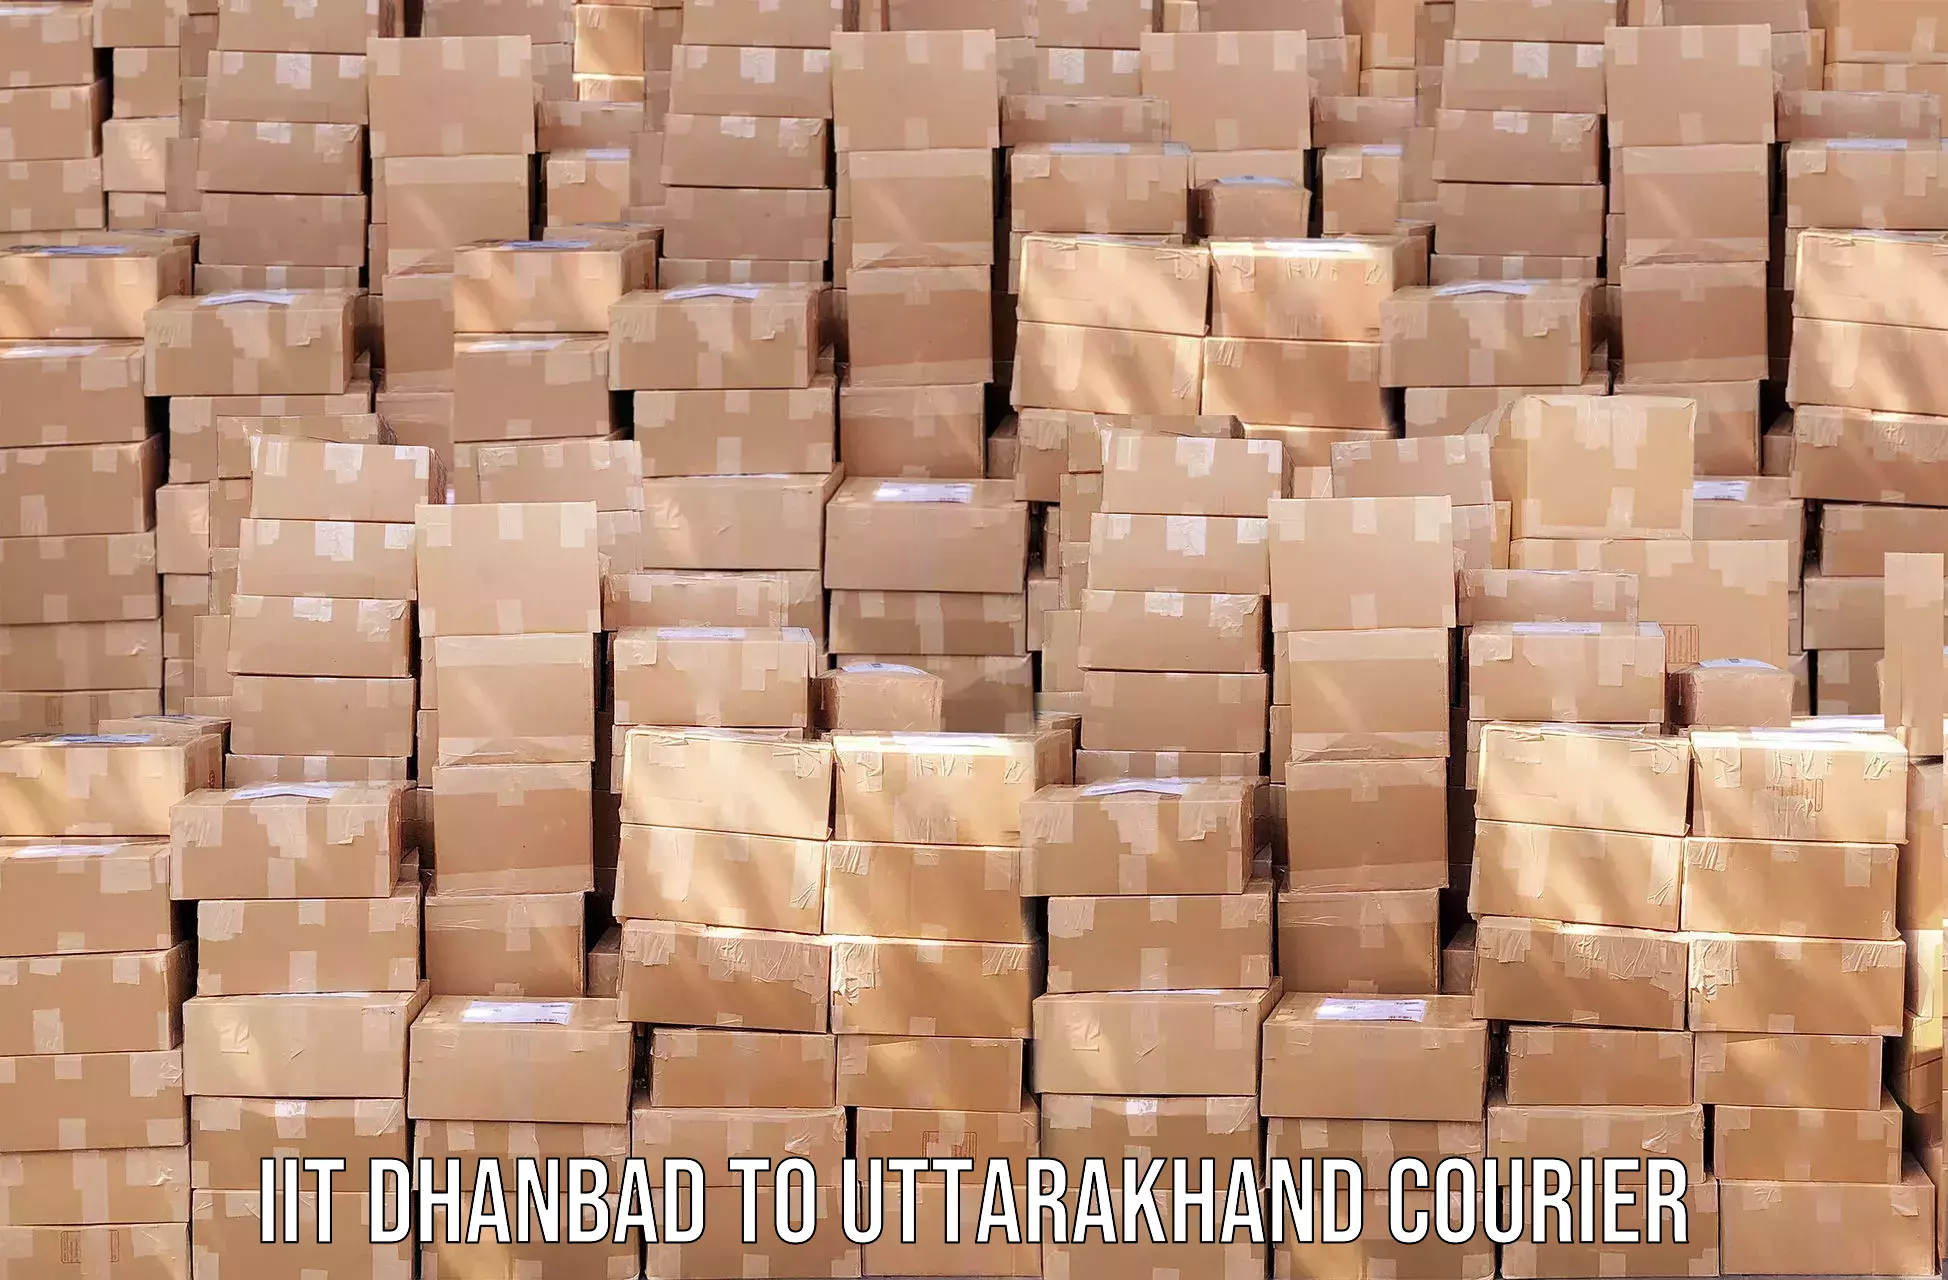 High value parcel delivery in IIT Dhanbad to Uttarakhand